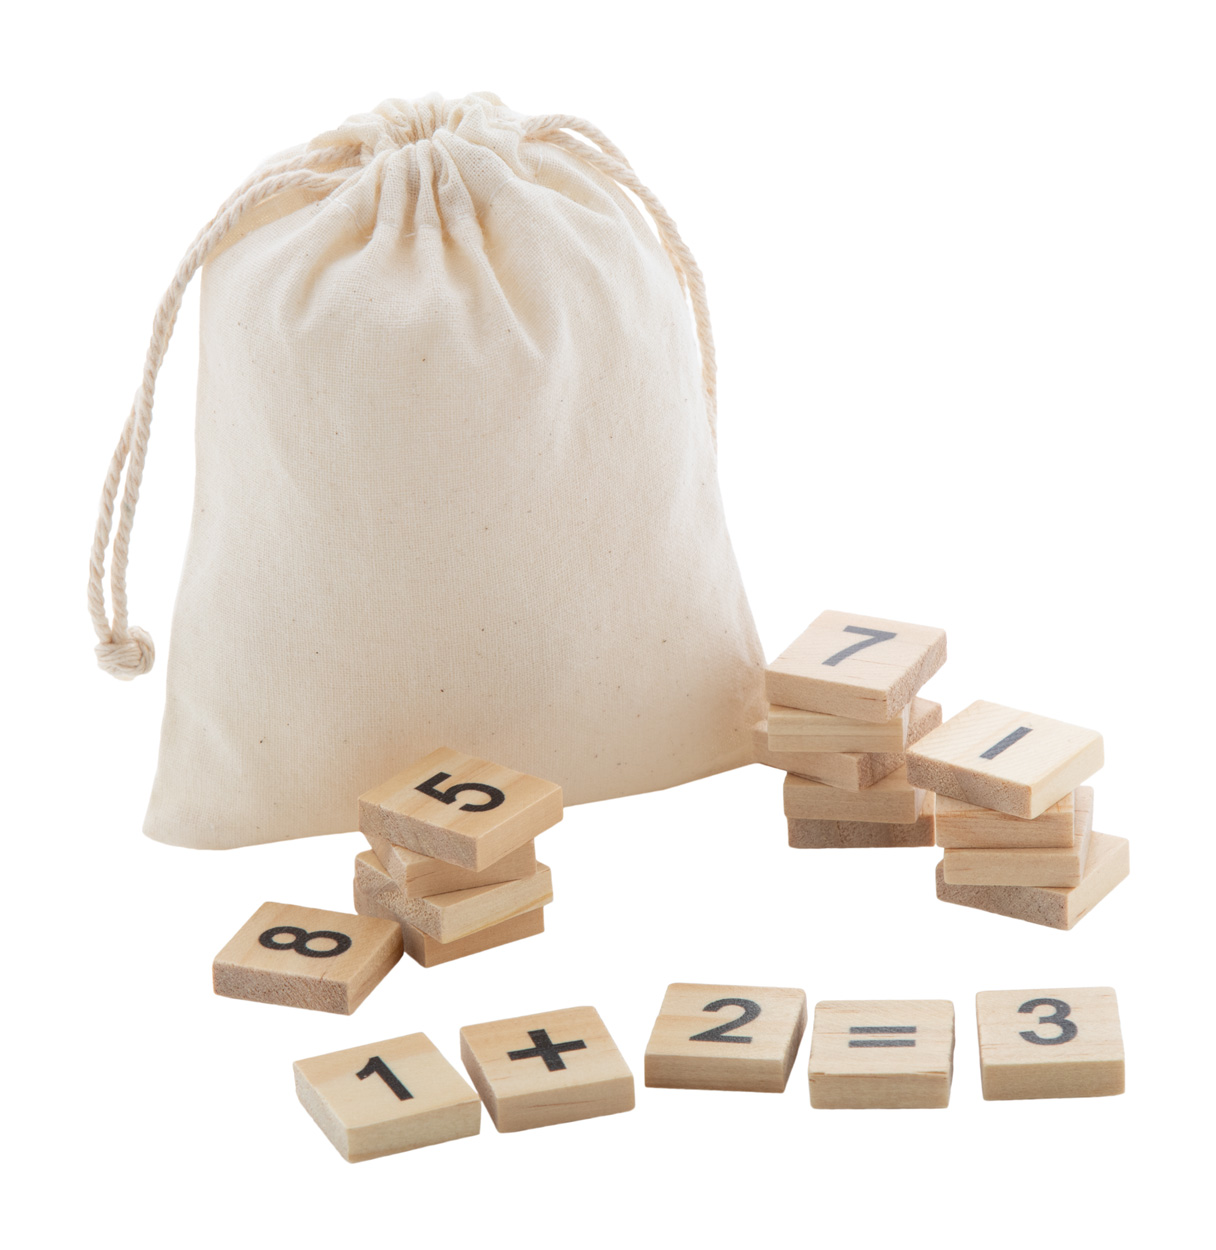 Wooden counting game GALOIS in fabric bag, 32 pieces - natural